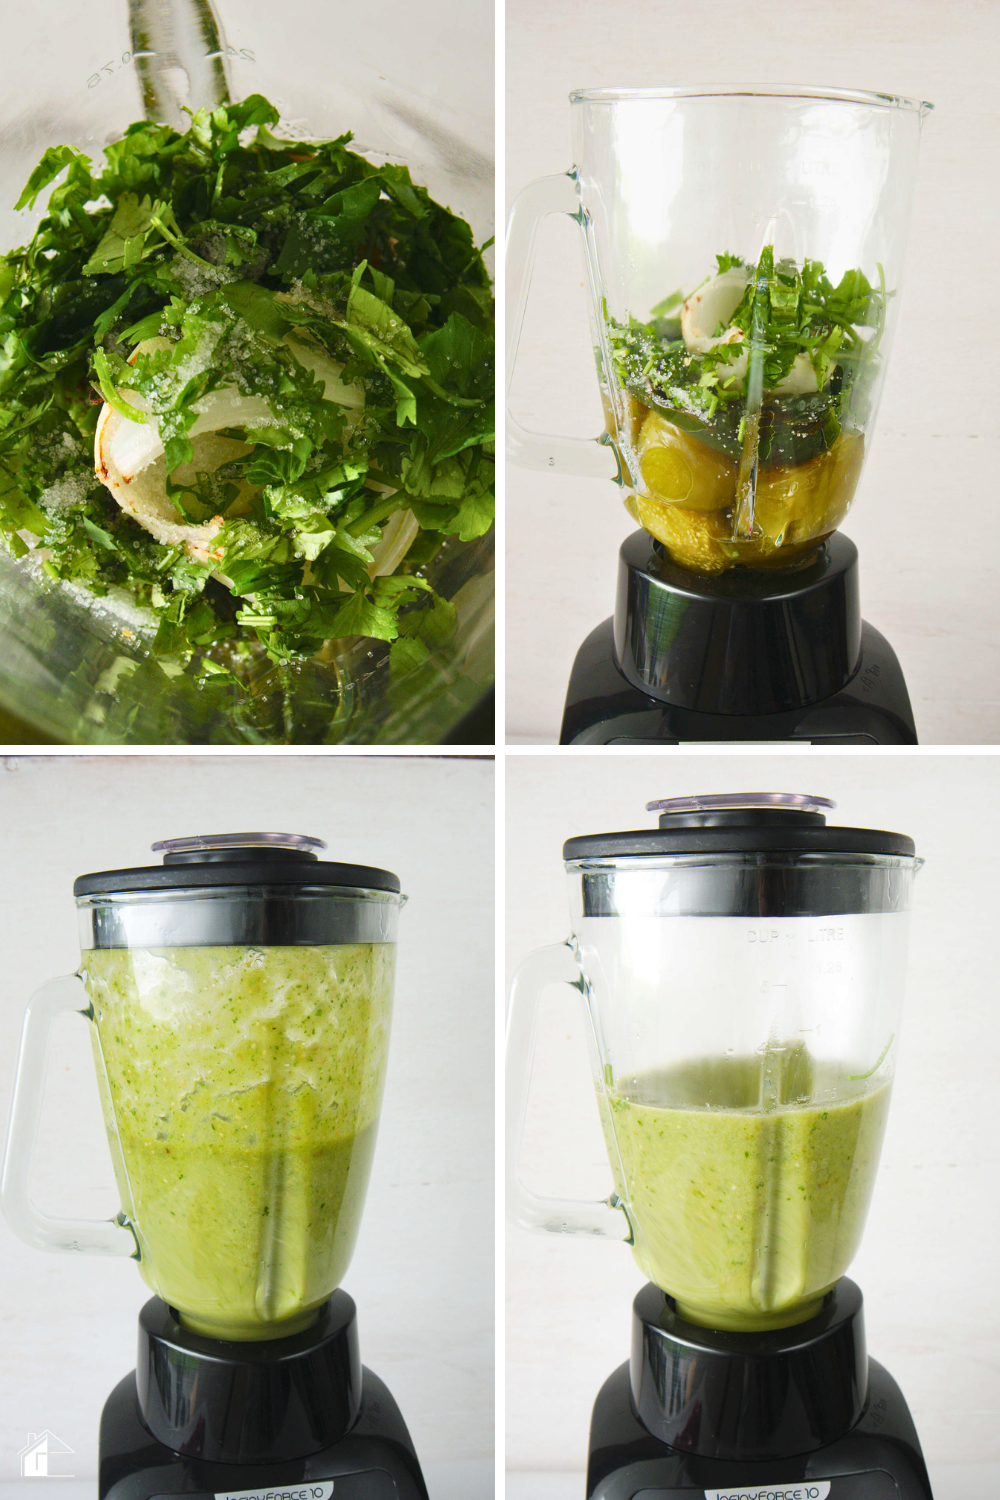 4 images showing cooked ingredients in the blender.